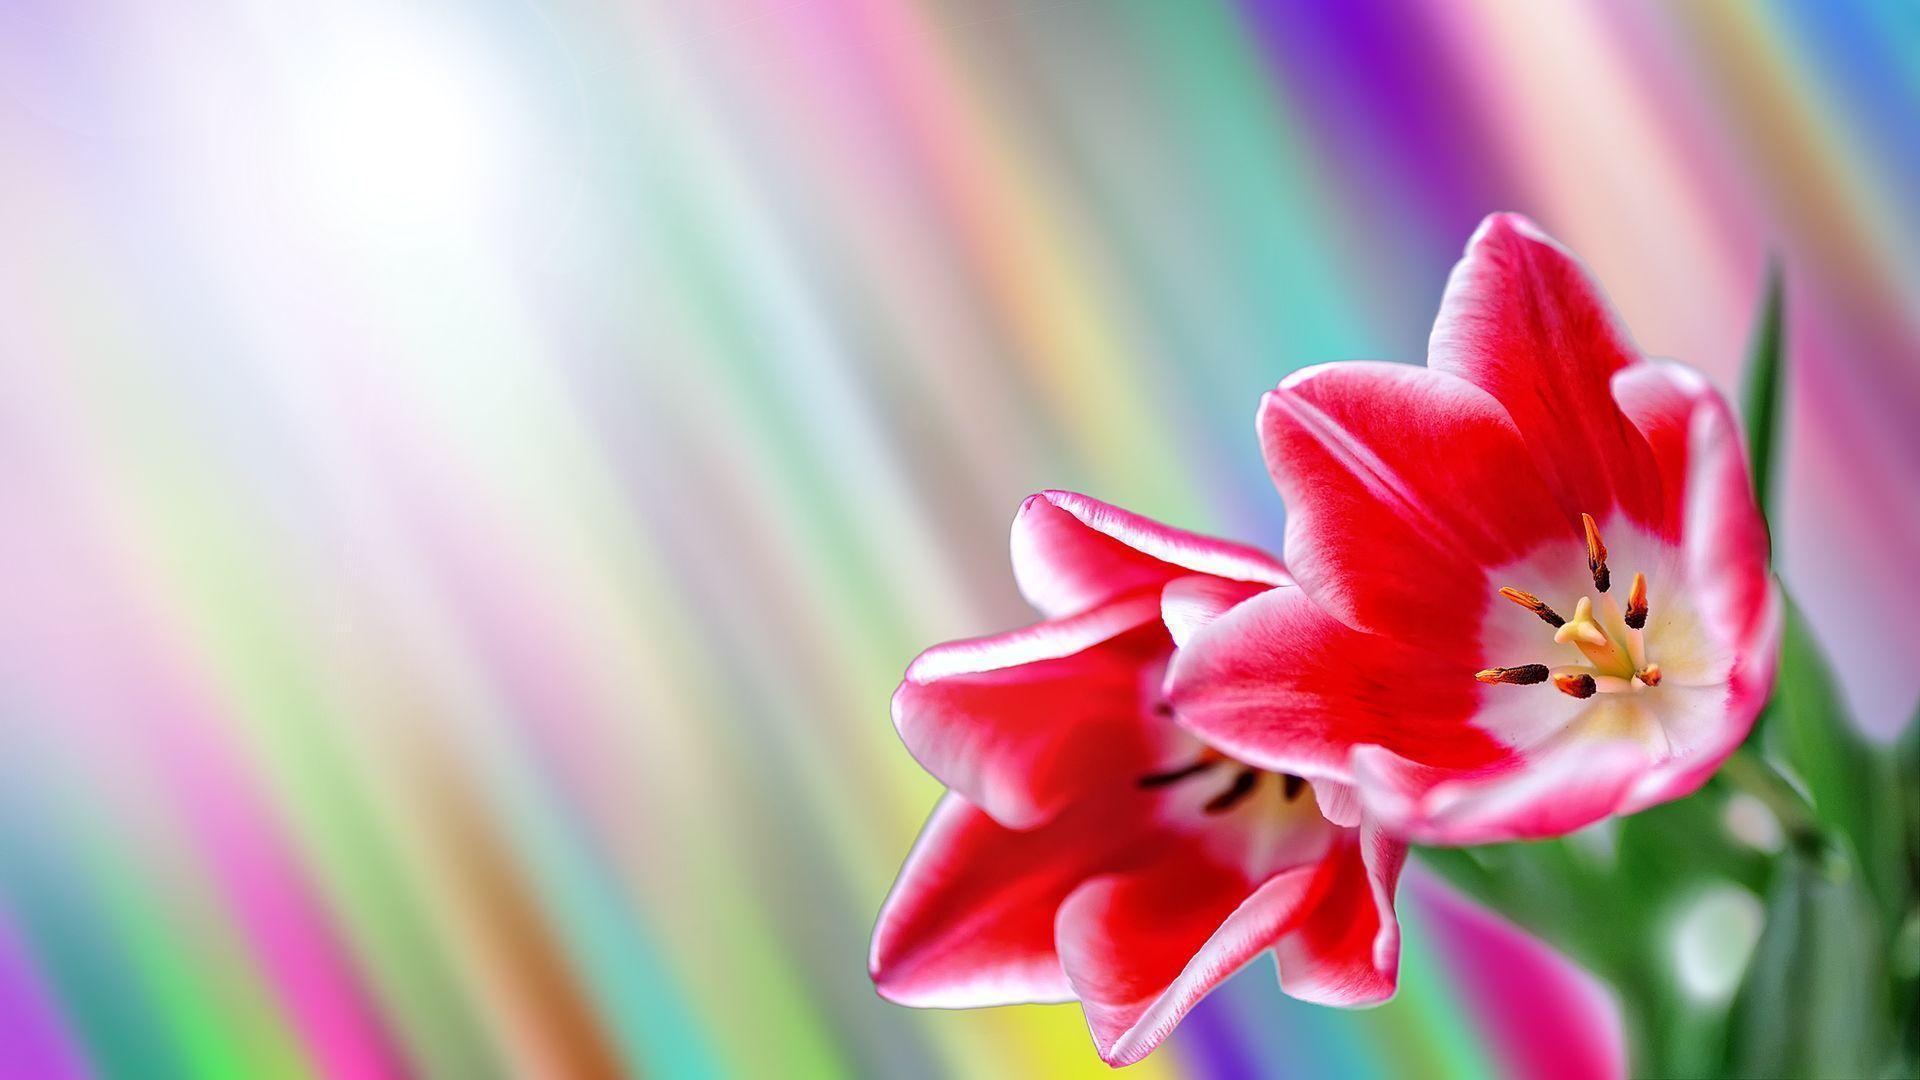 Android wallpaper for Spring 2013